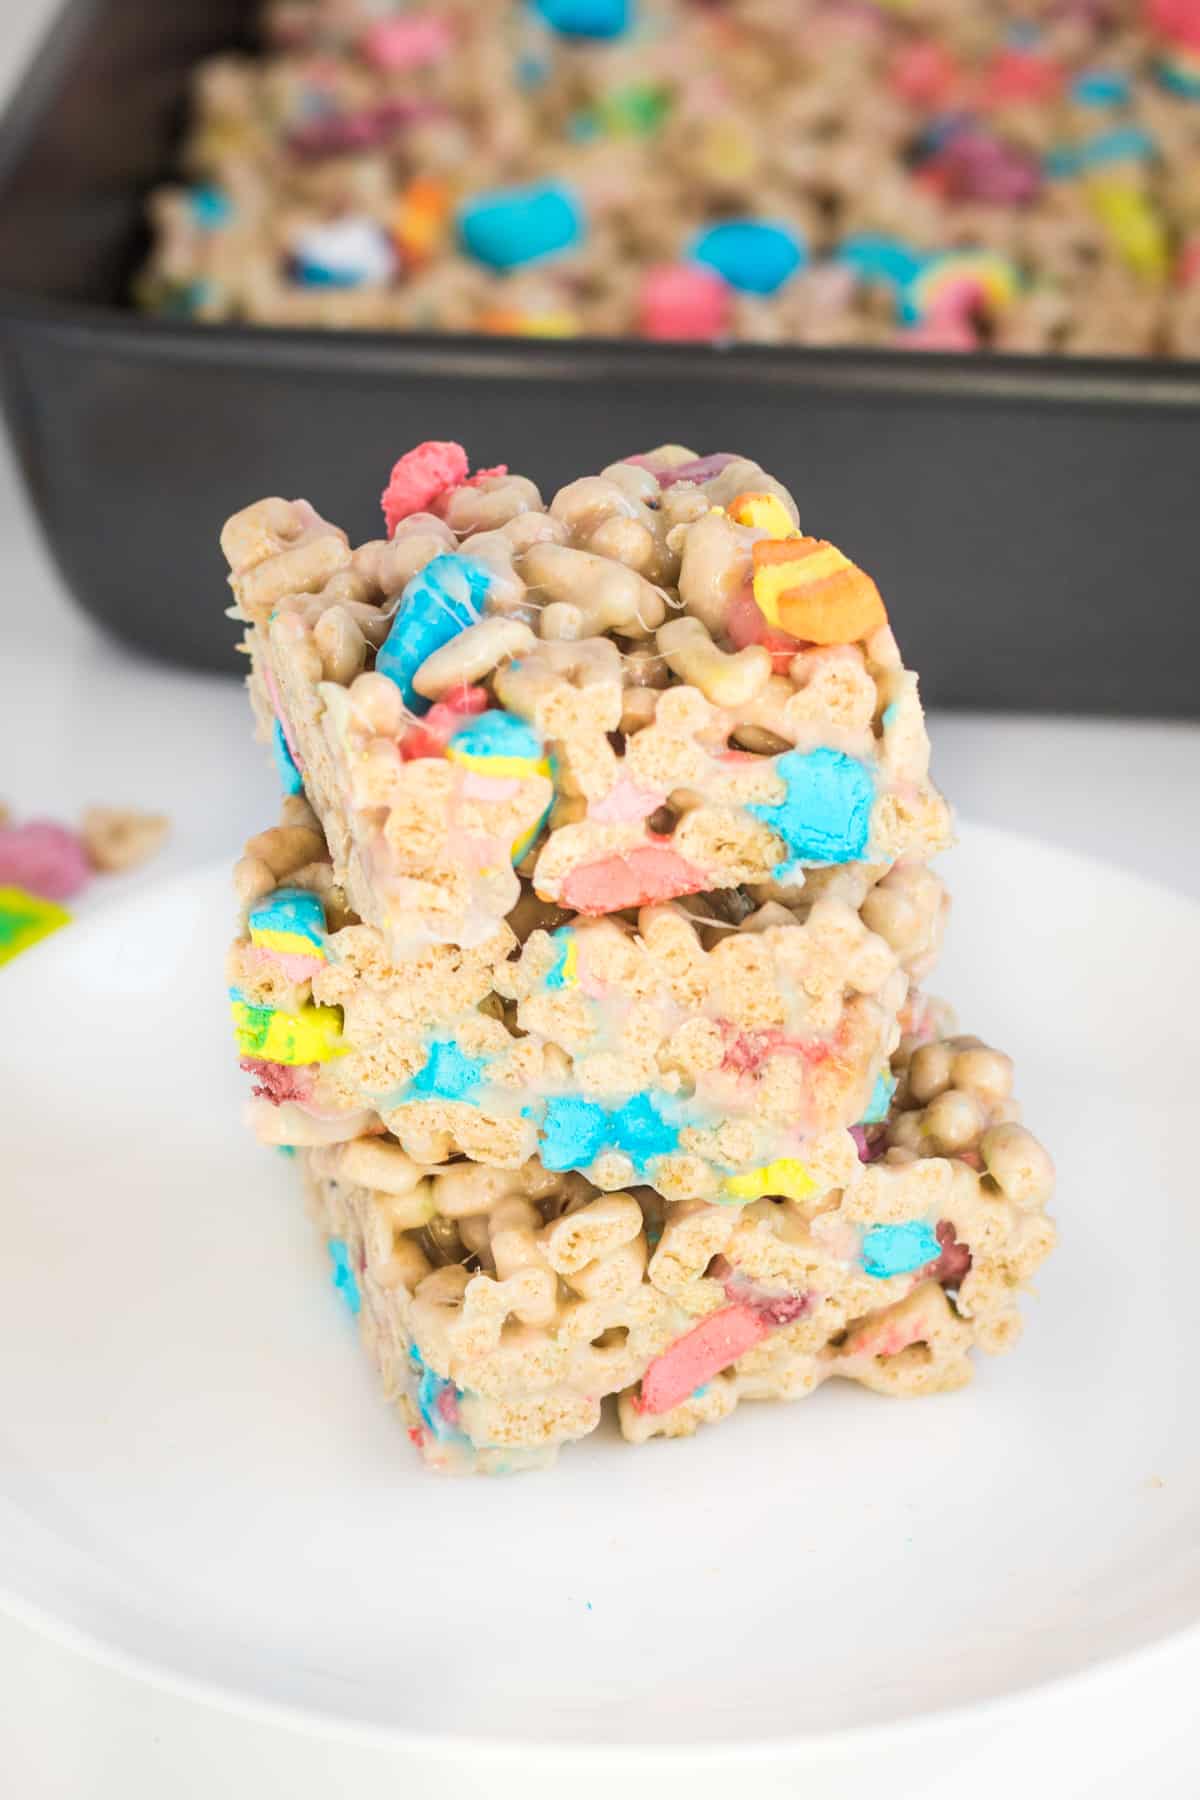 Three lucky charms marshmallow cereal bars cut into squares and stacked on top of one another on a white plate. A baking pan with uncut treats is behind them.